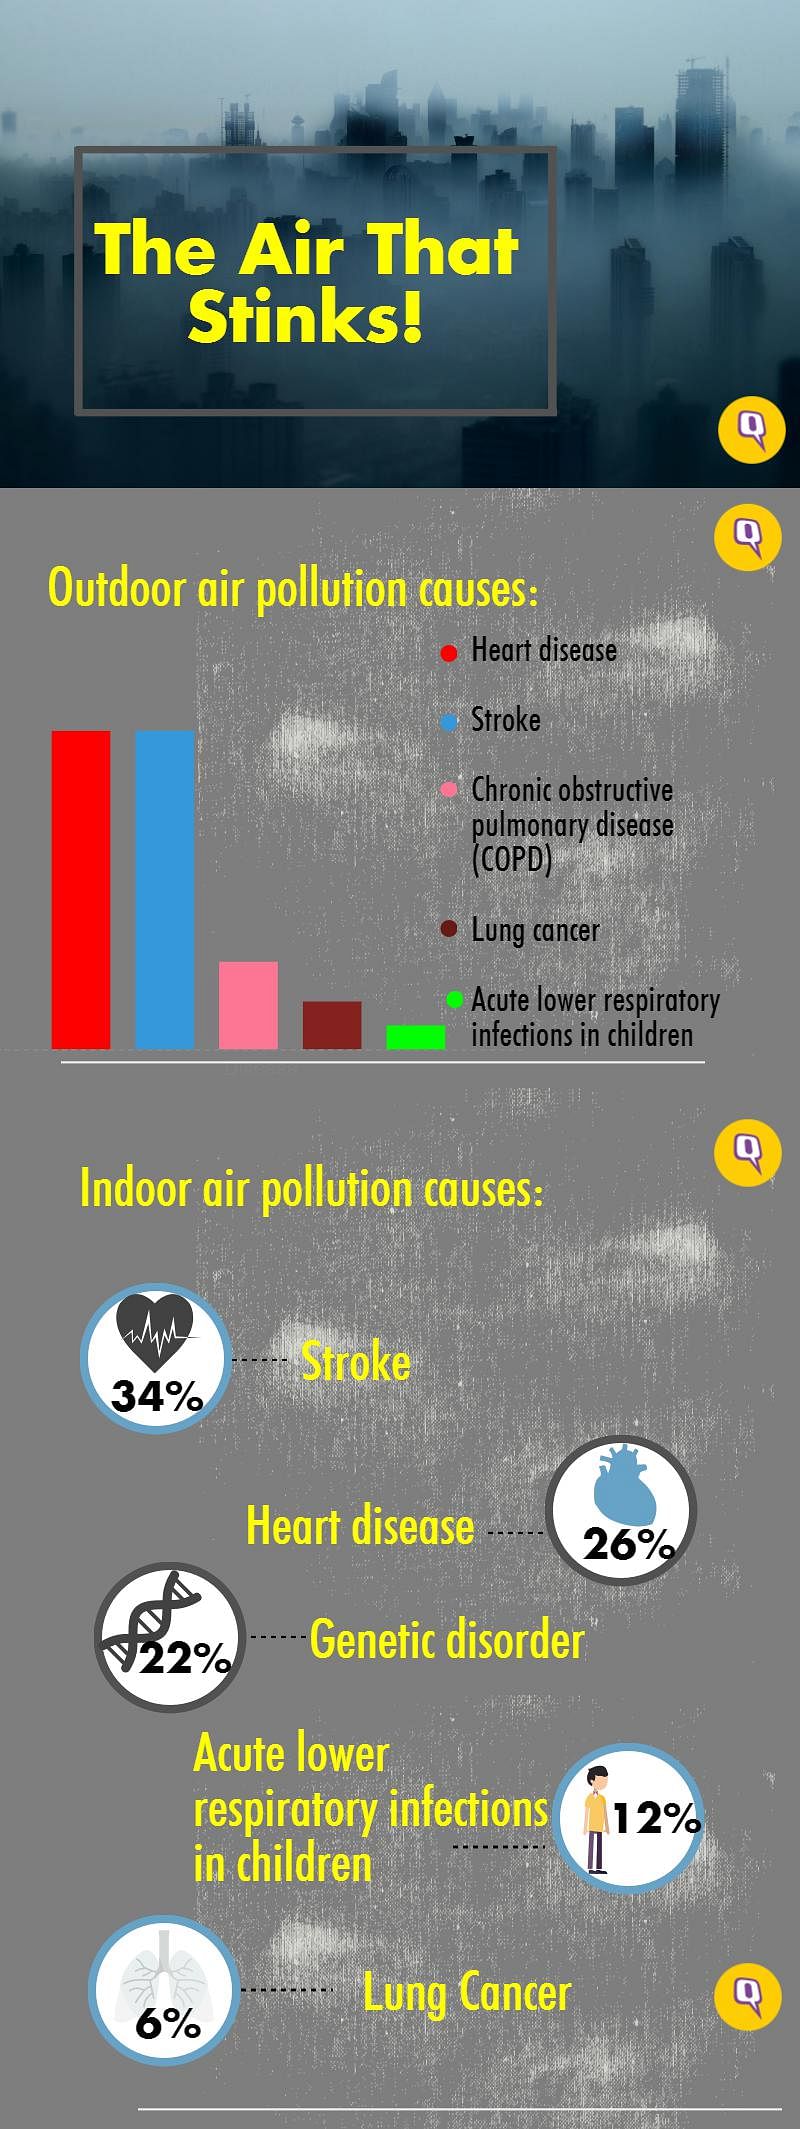 Delhi is choking in a toxic haze, its air has been 45% more polluted than Beijing since 2014.